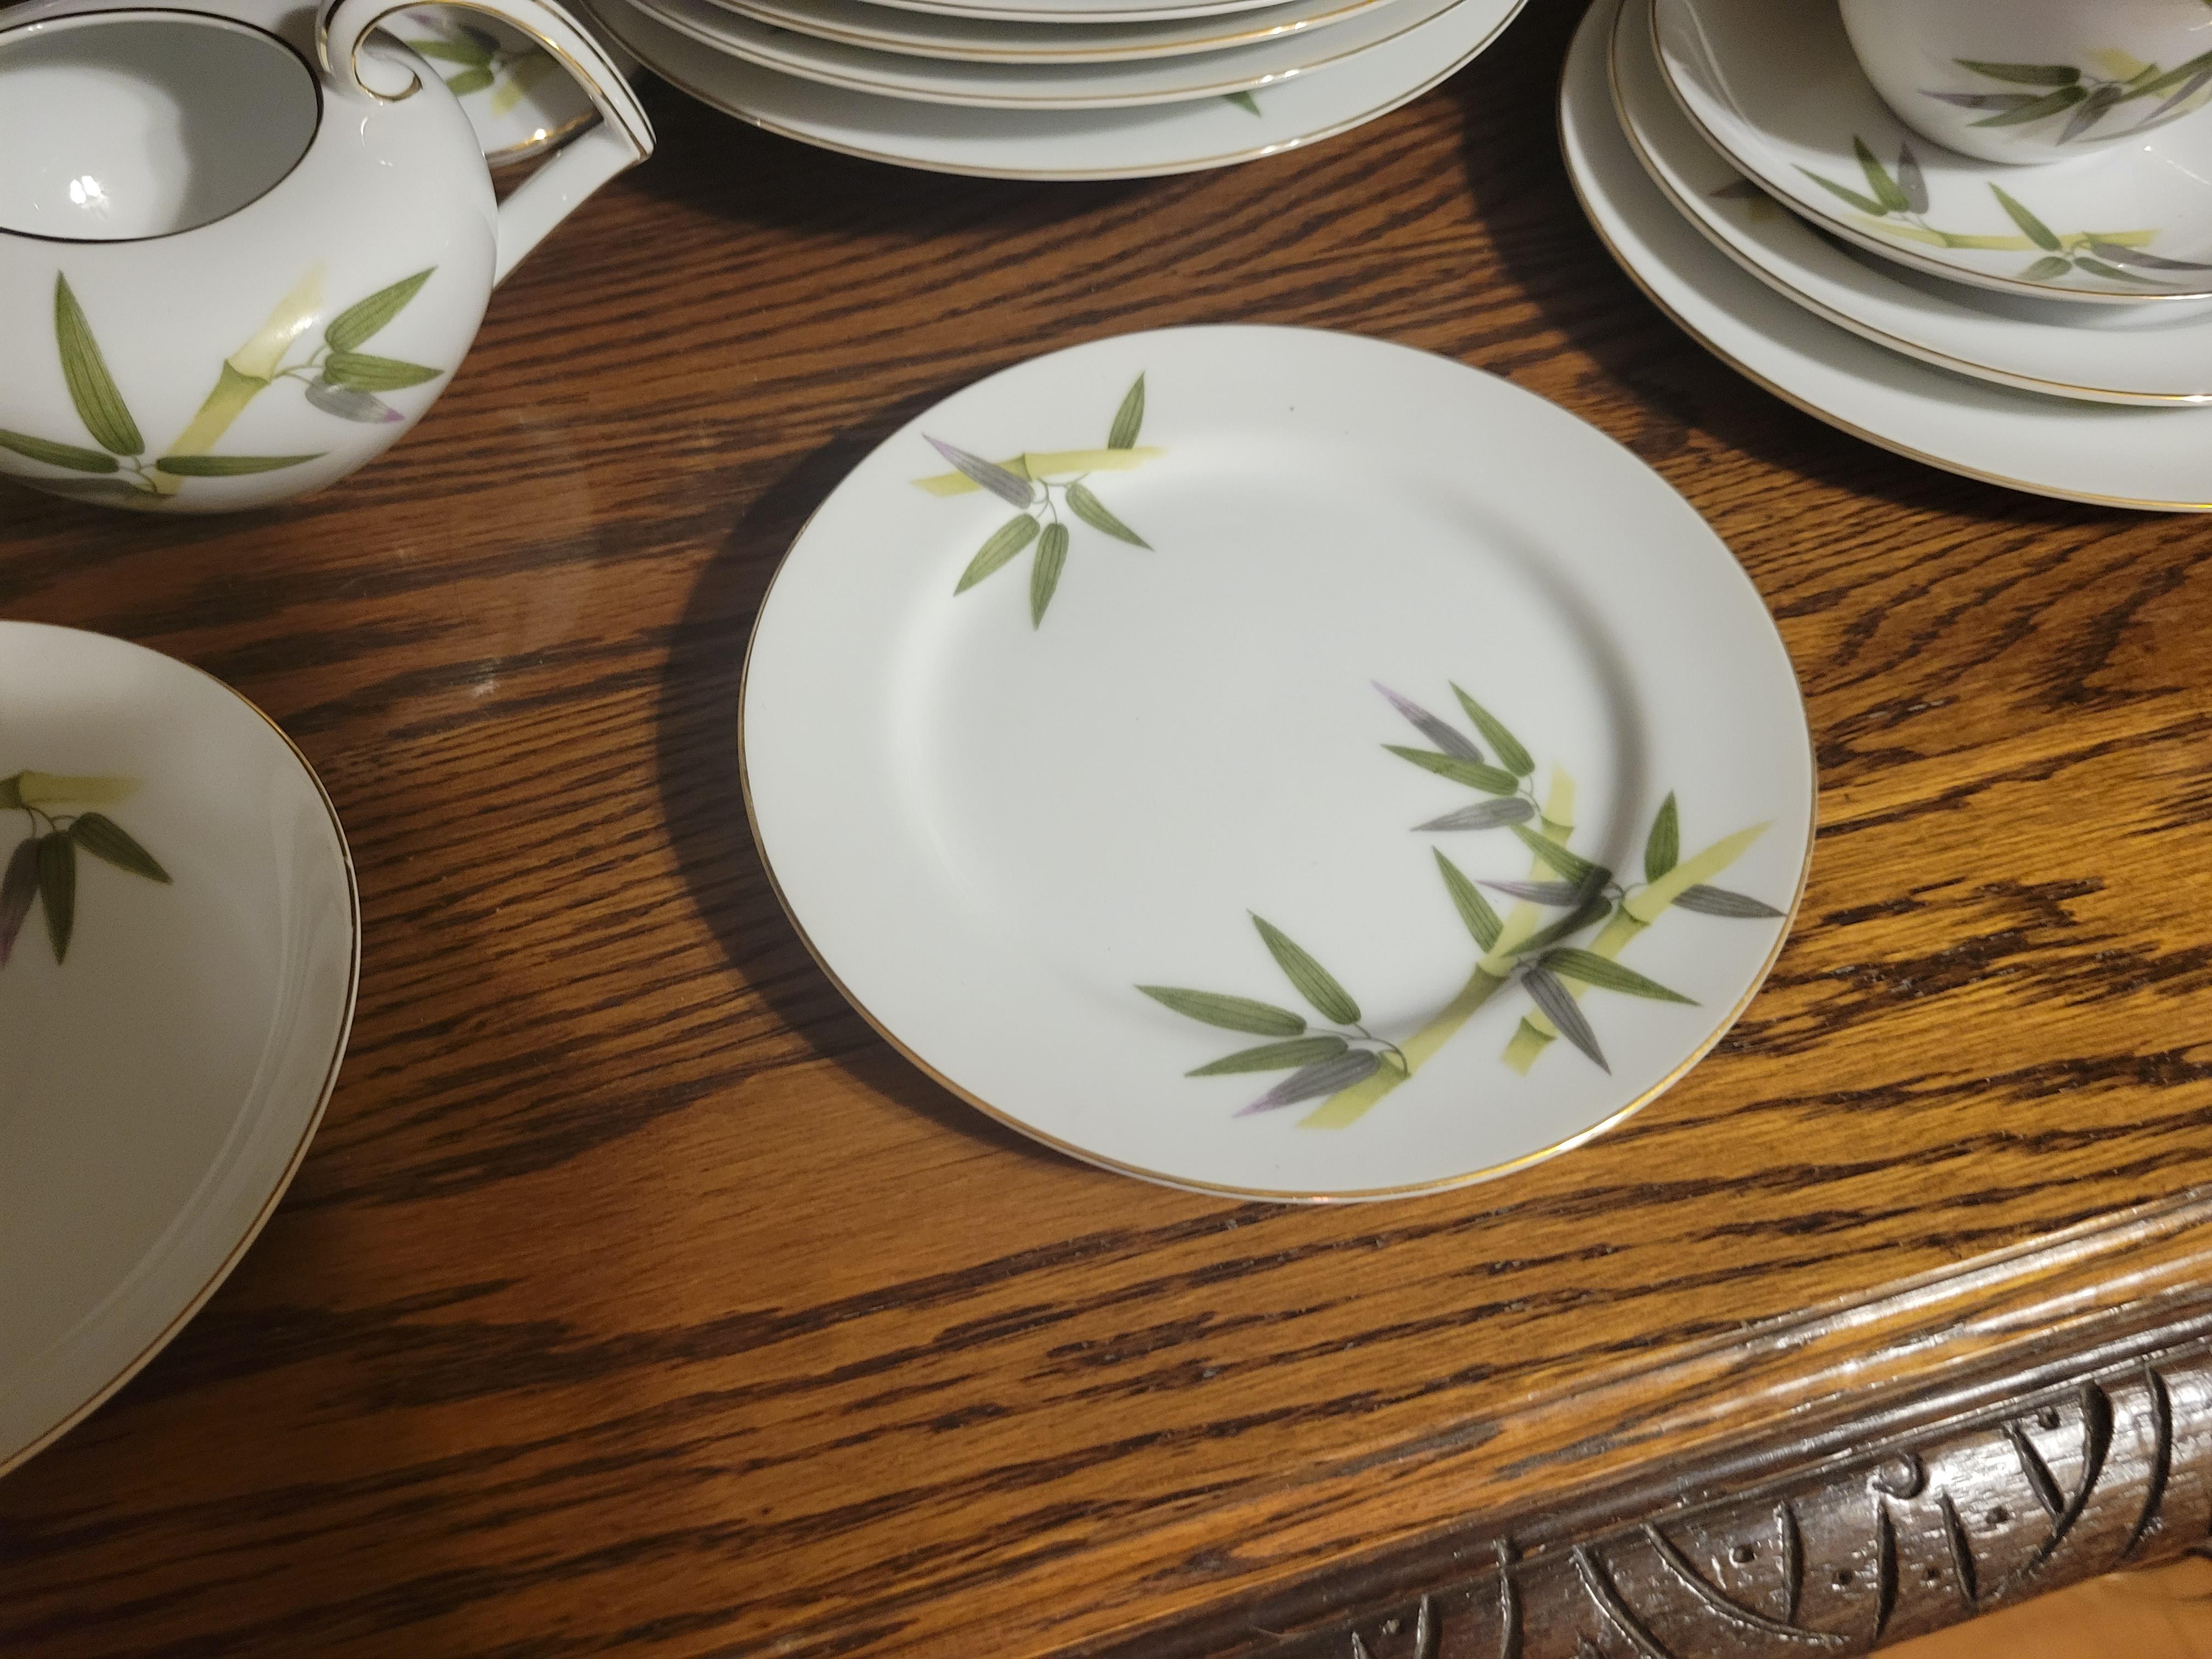 1951 Narumi Japan 'Spring Bamboo' Fine China Set - 24 pieces plus replacements  For Sale 7